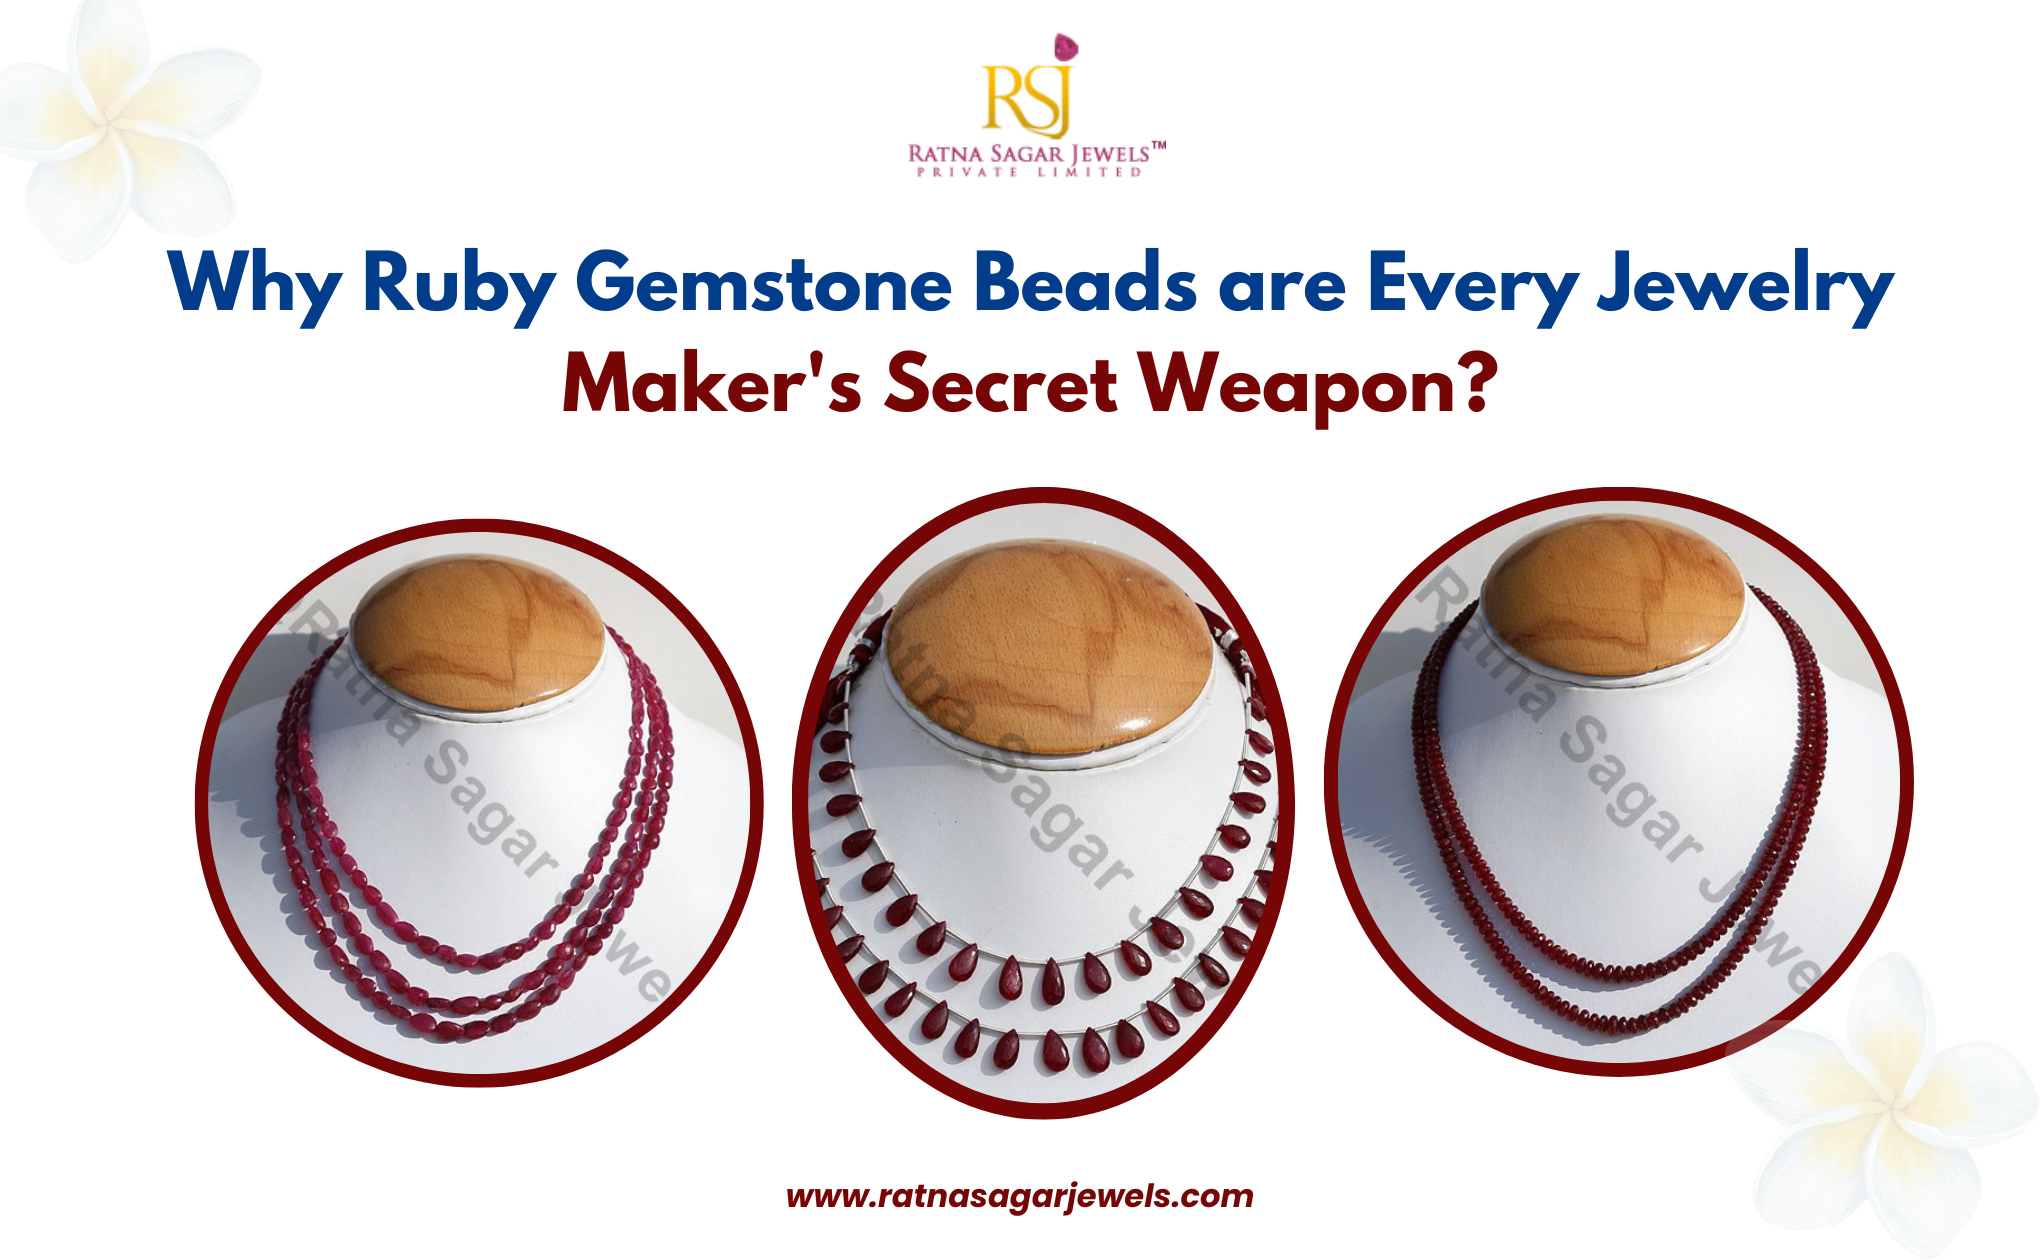 Why Ruby Gemstone Beads are Every Jewelry Maker’s Secret Weapon?